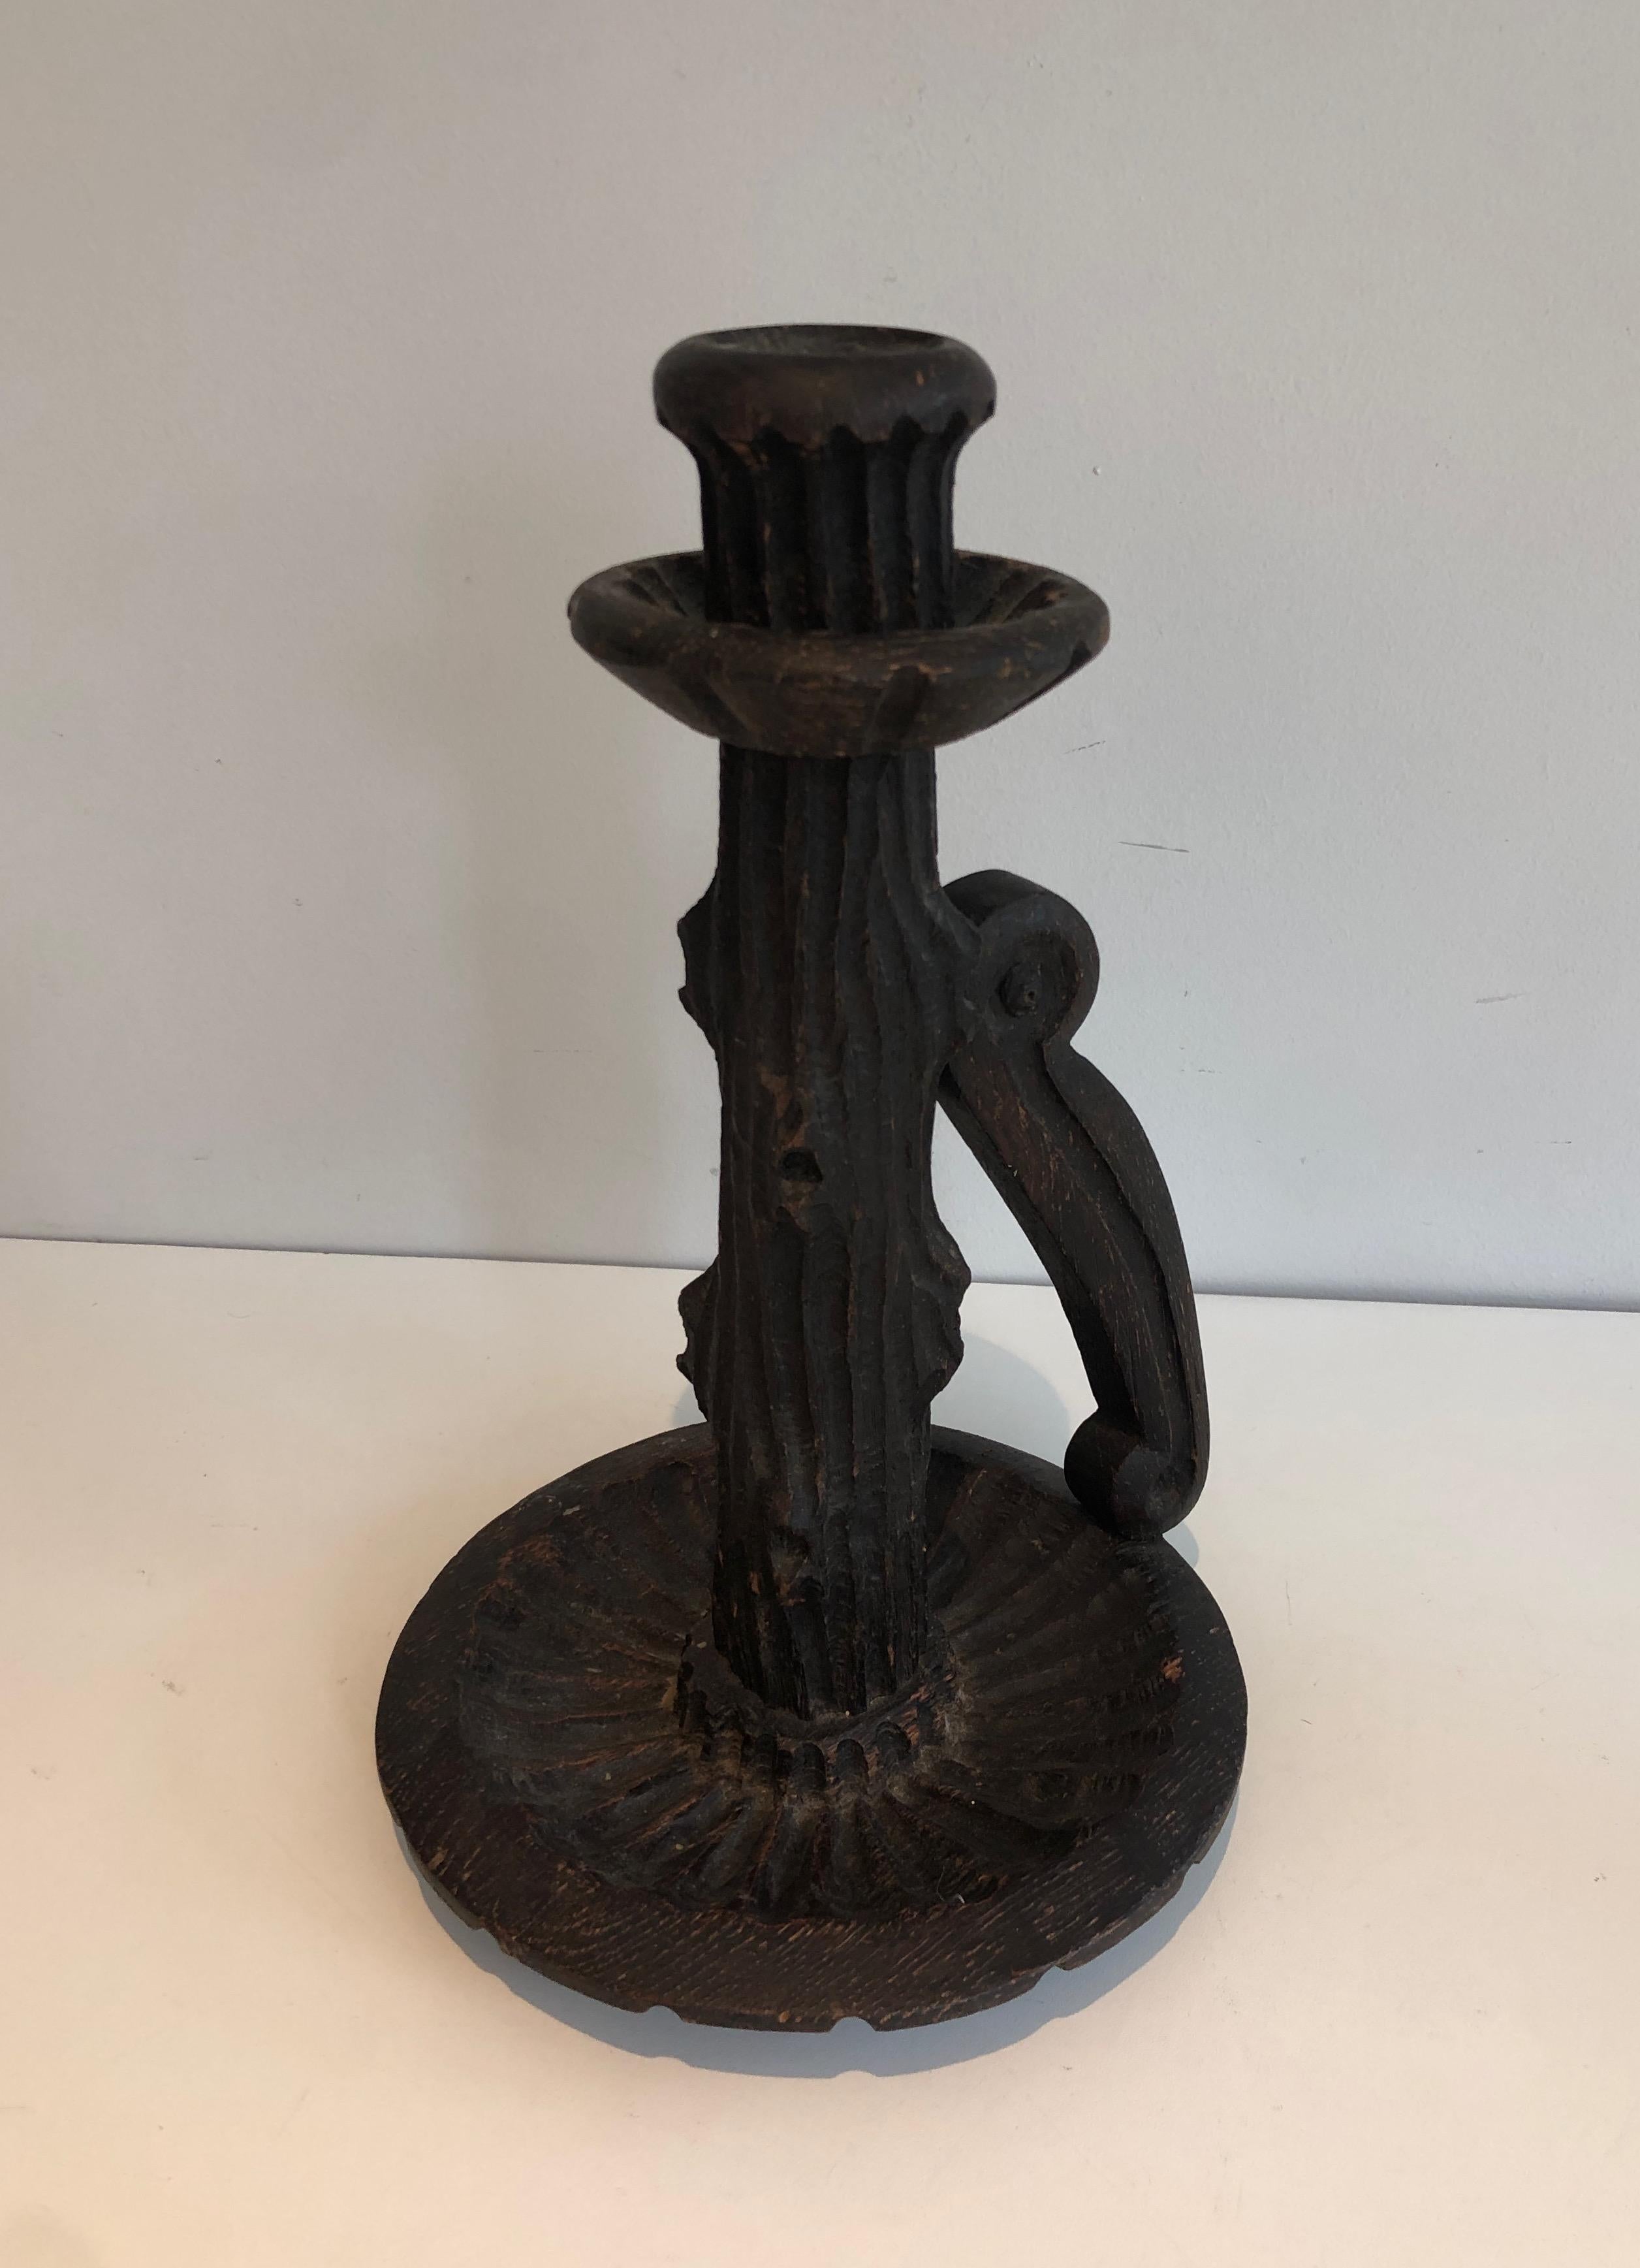 Pair of Tall Brutalist Candle Holders Made of Carved Wood, French, circa 1950 For Sale 1